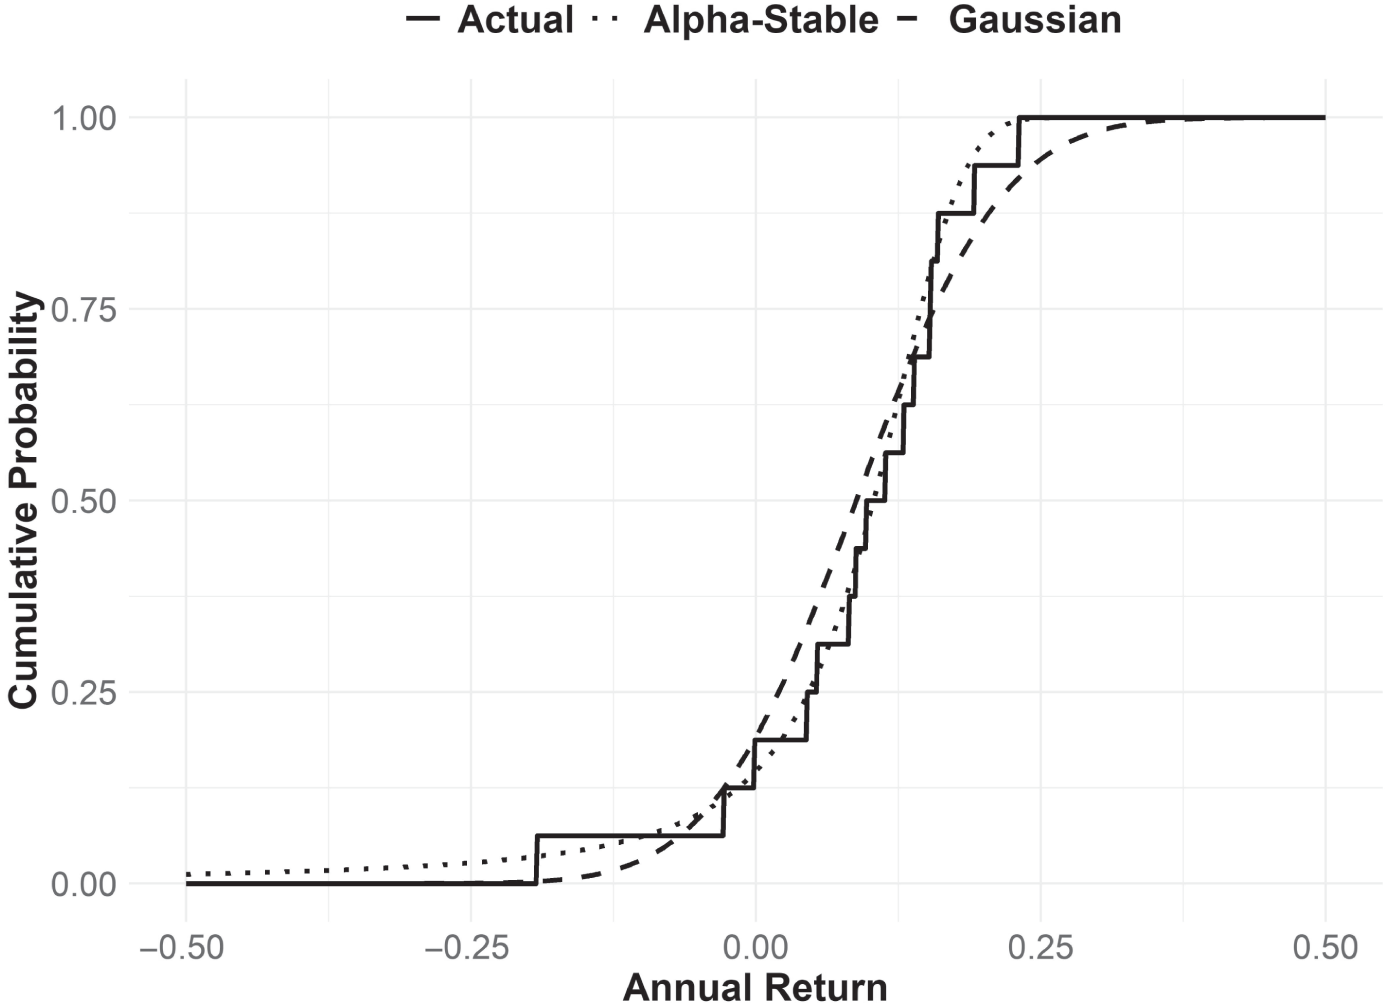 Schematic illustration of Cumulative Distribution Function of Actual, Alpha-Stable, and Gaussian Annual Return Distributions 60% SPY, 30% AGG, 10% GLD Portfolio, 2004–2020